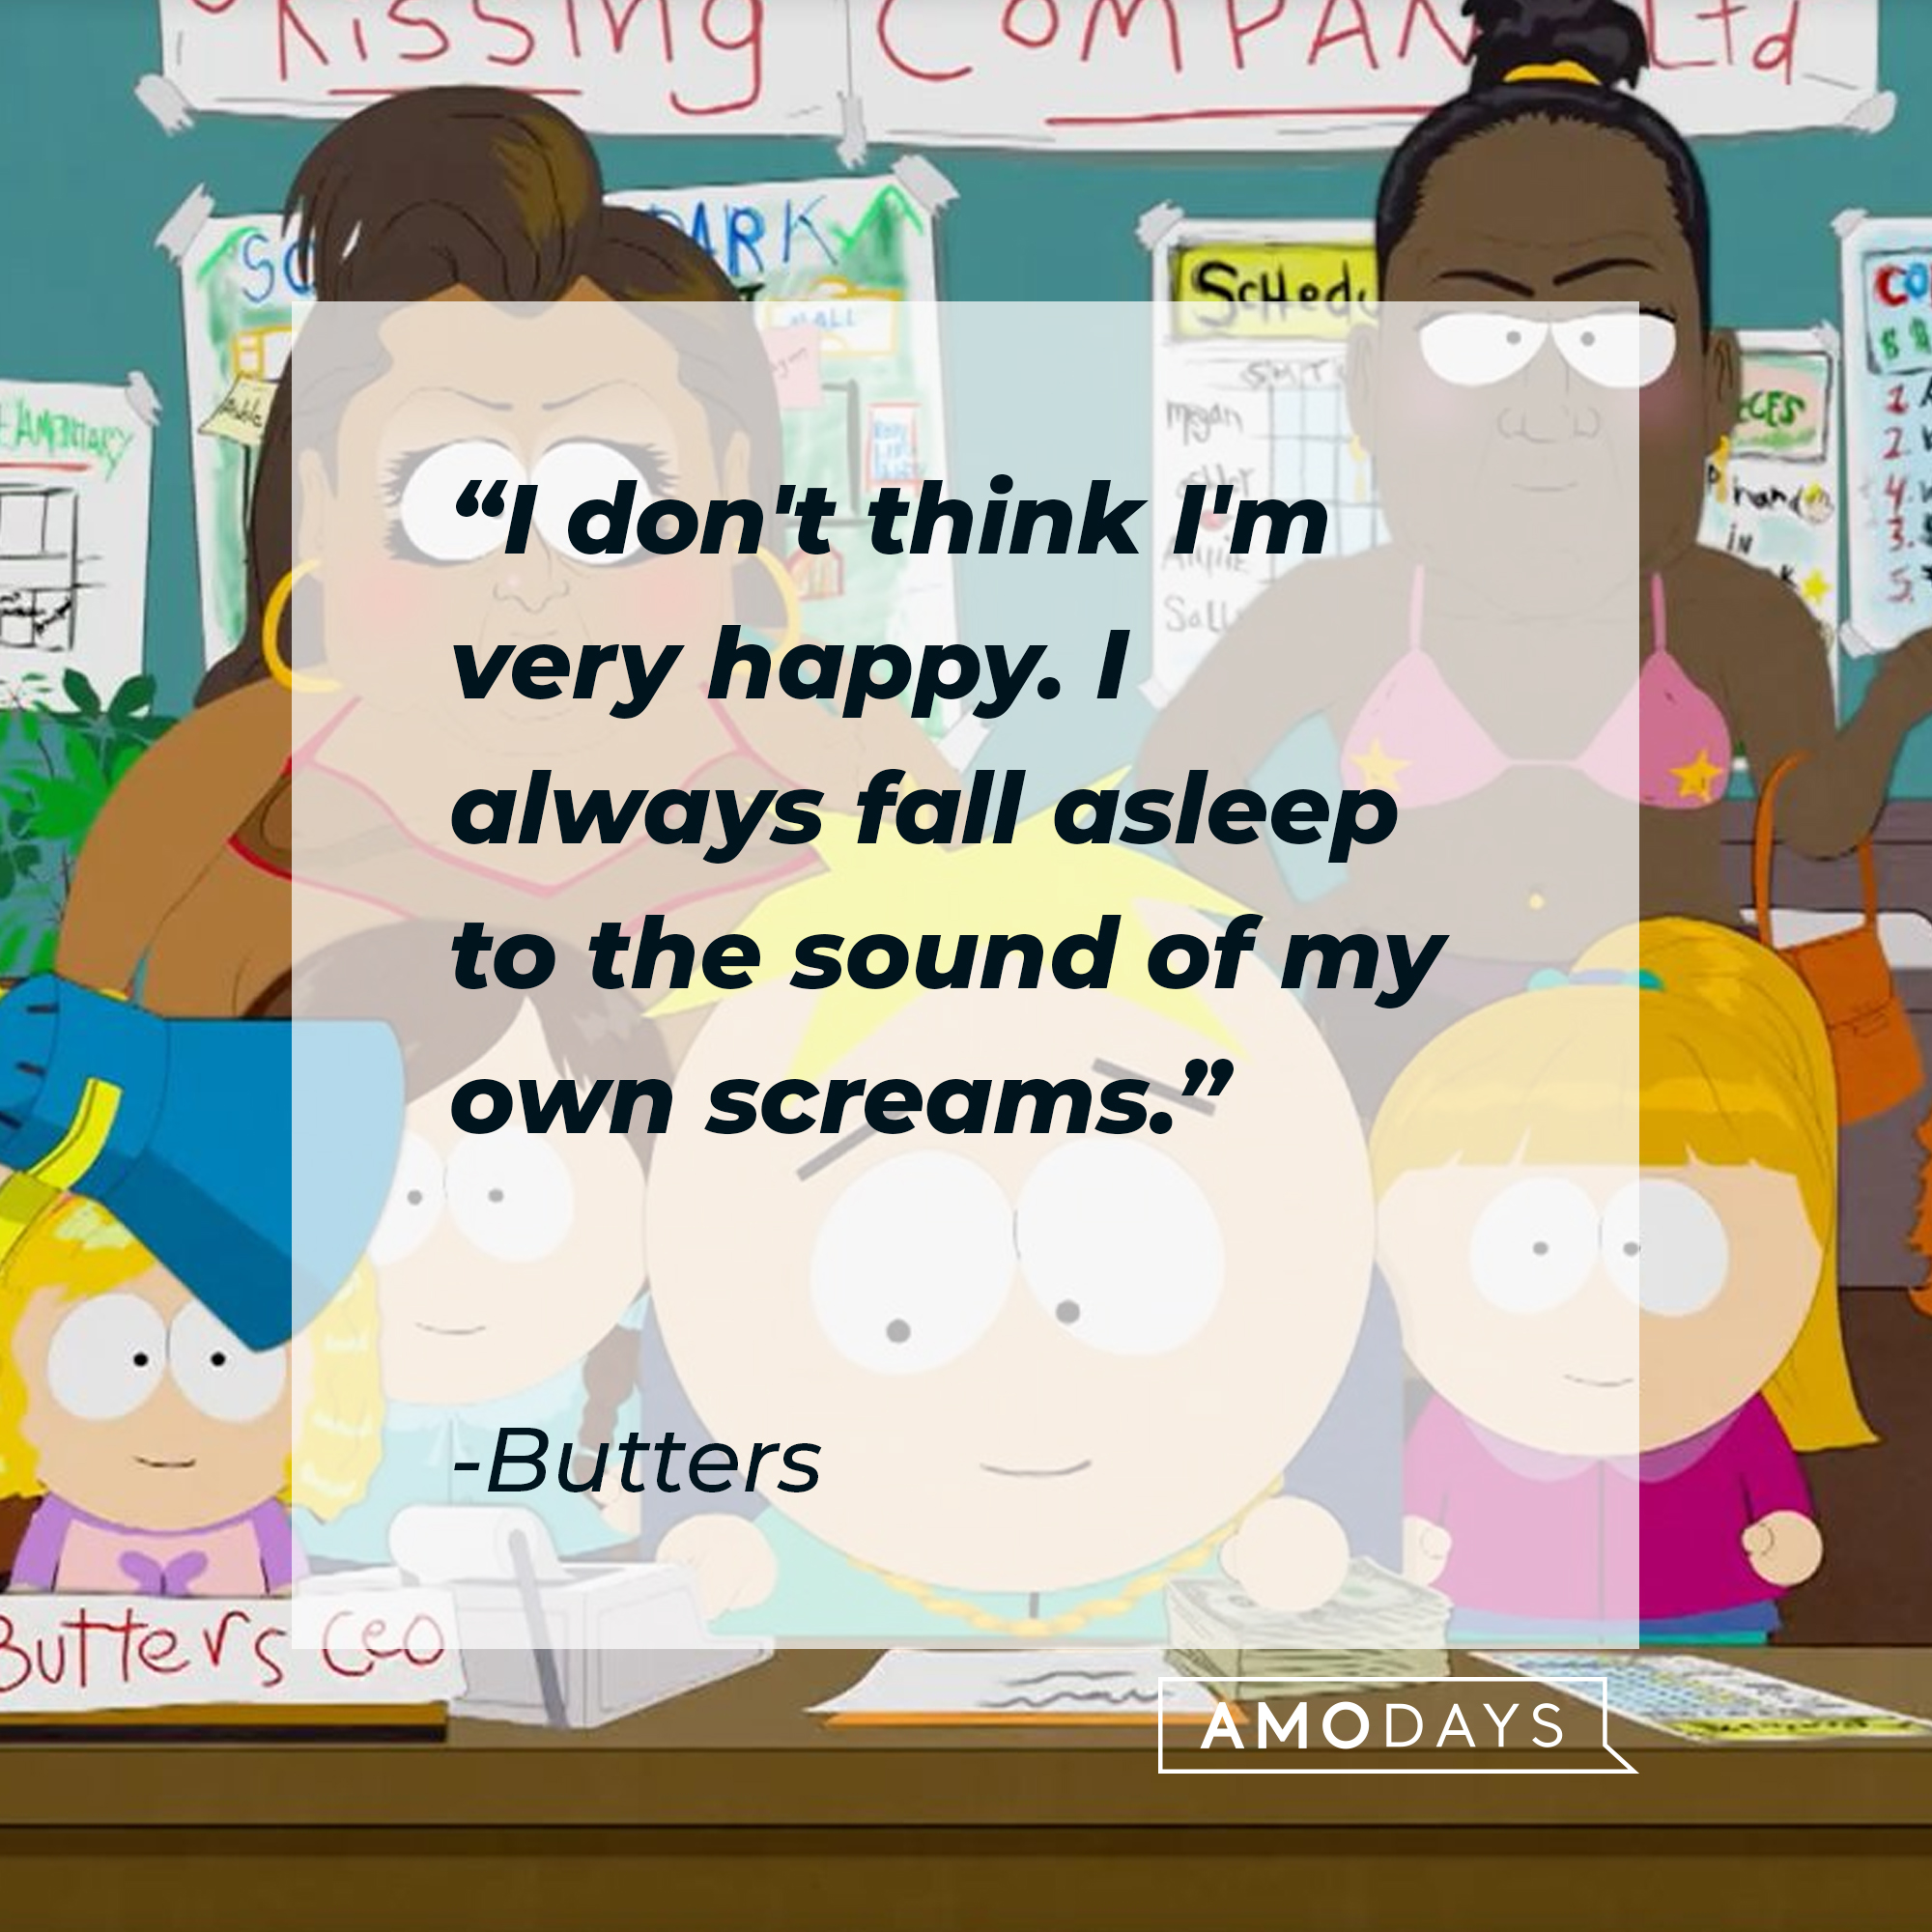 Butters' quote: "I don't think I'm very happy. I always fall asleep to the sound of my own screams." | Source: facebook.com/southpark